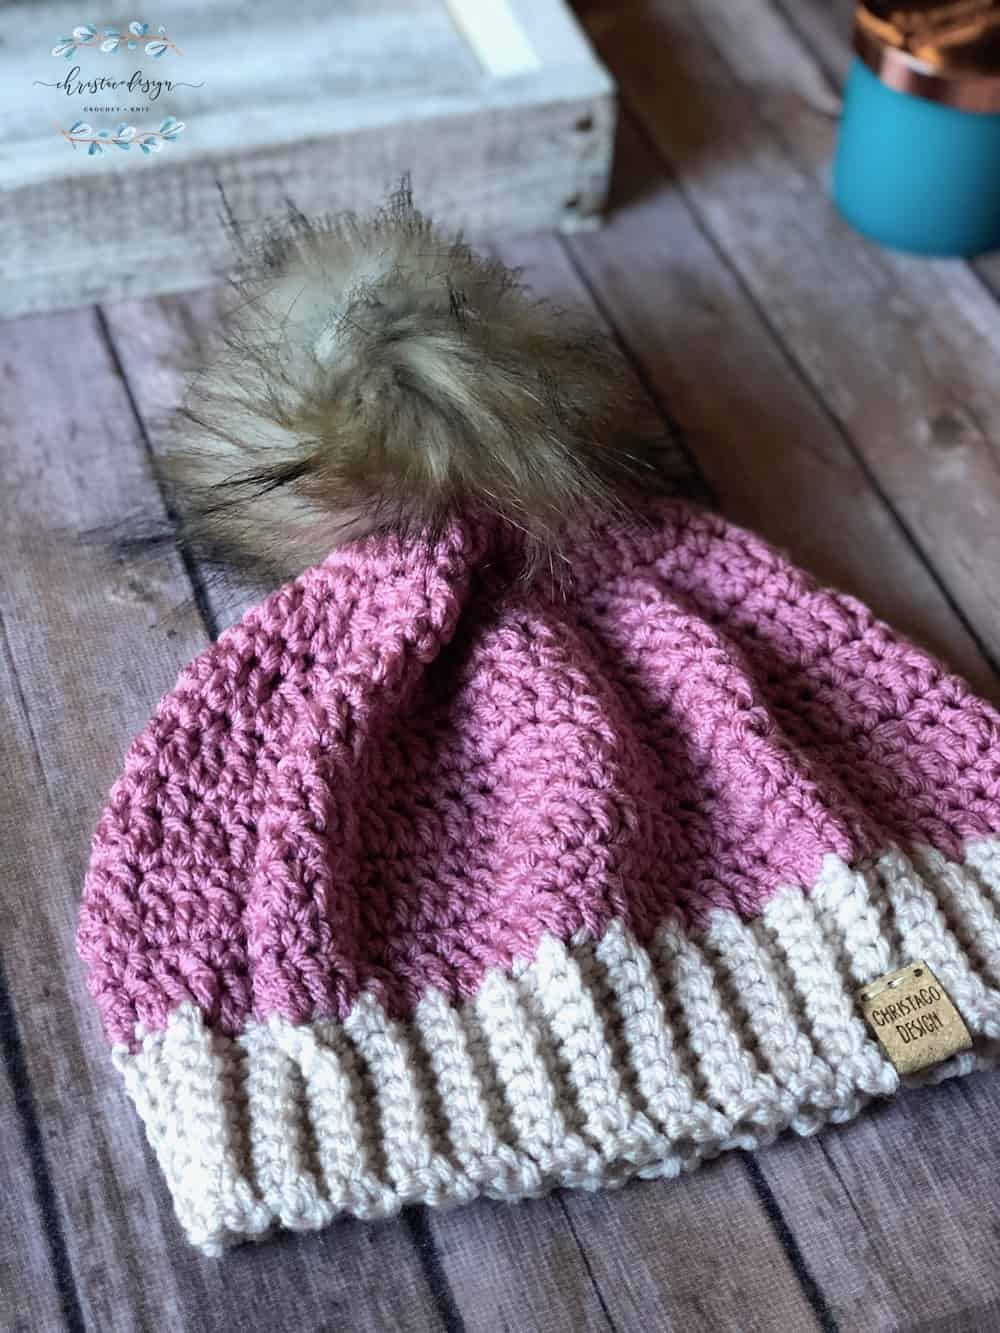 Pink crochet hat with fur pom on wood table.